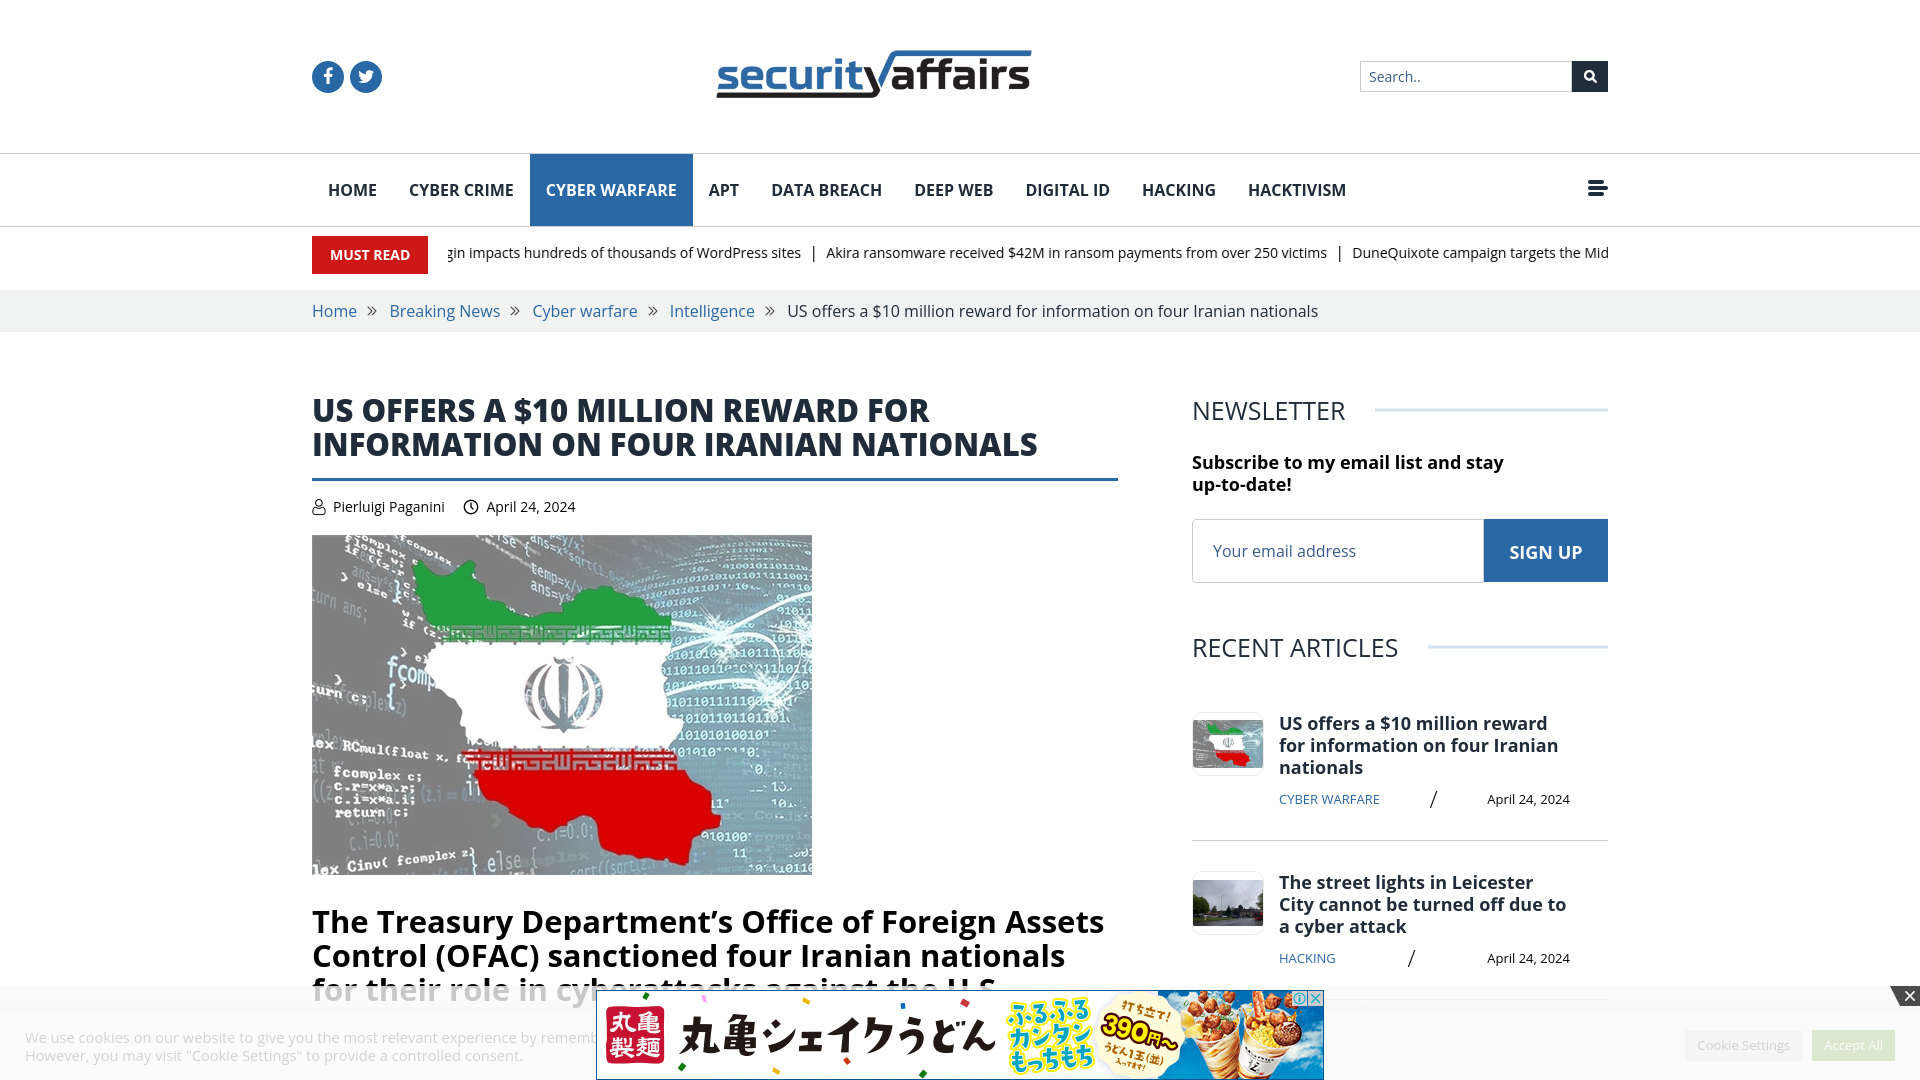 US offers a $10M reward for information on four Iranian nationals